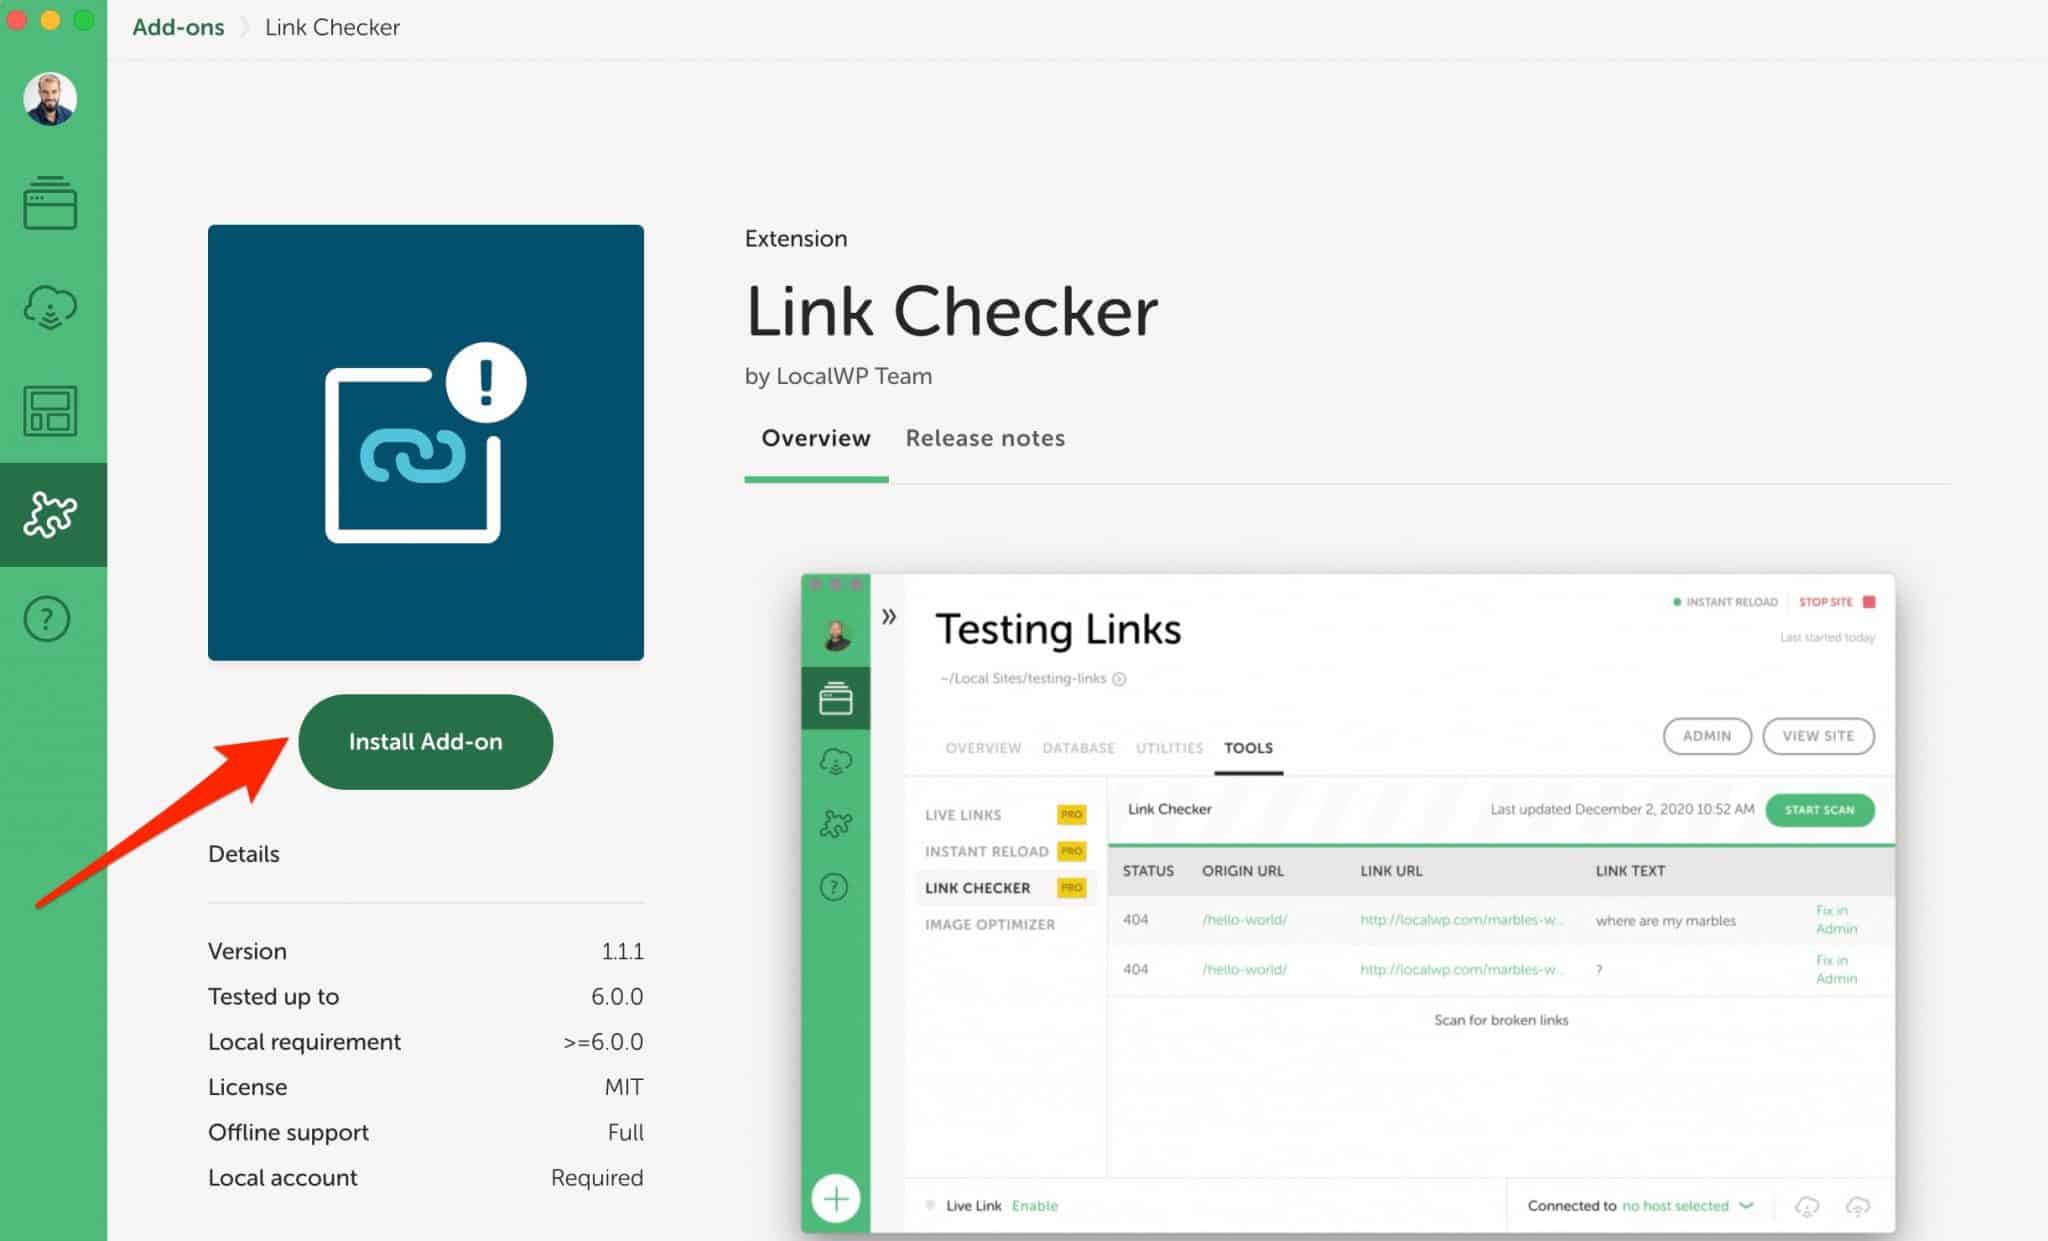 The Link Checker add-on allow you to test links.